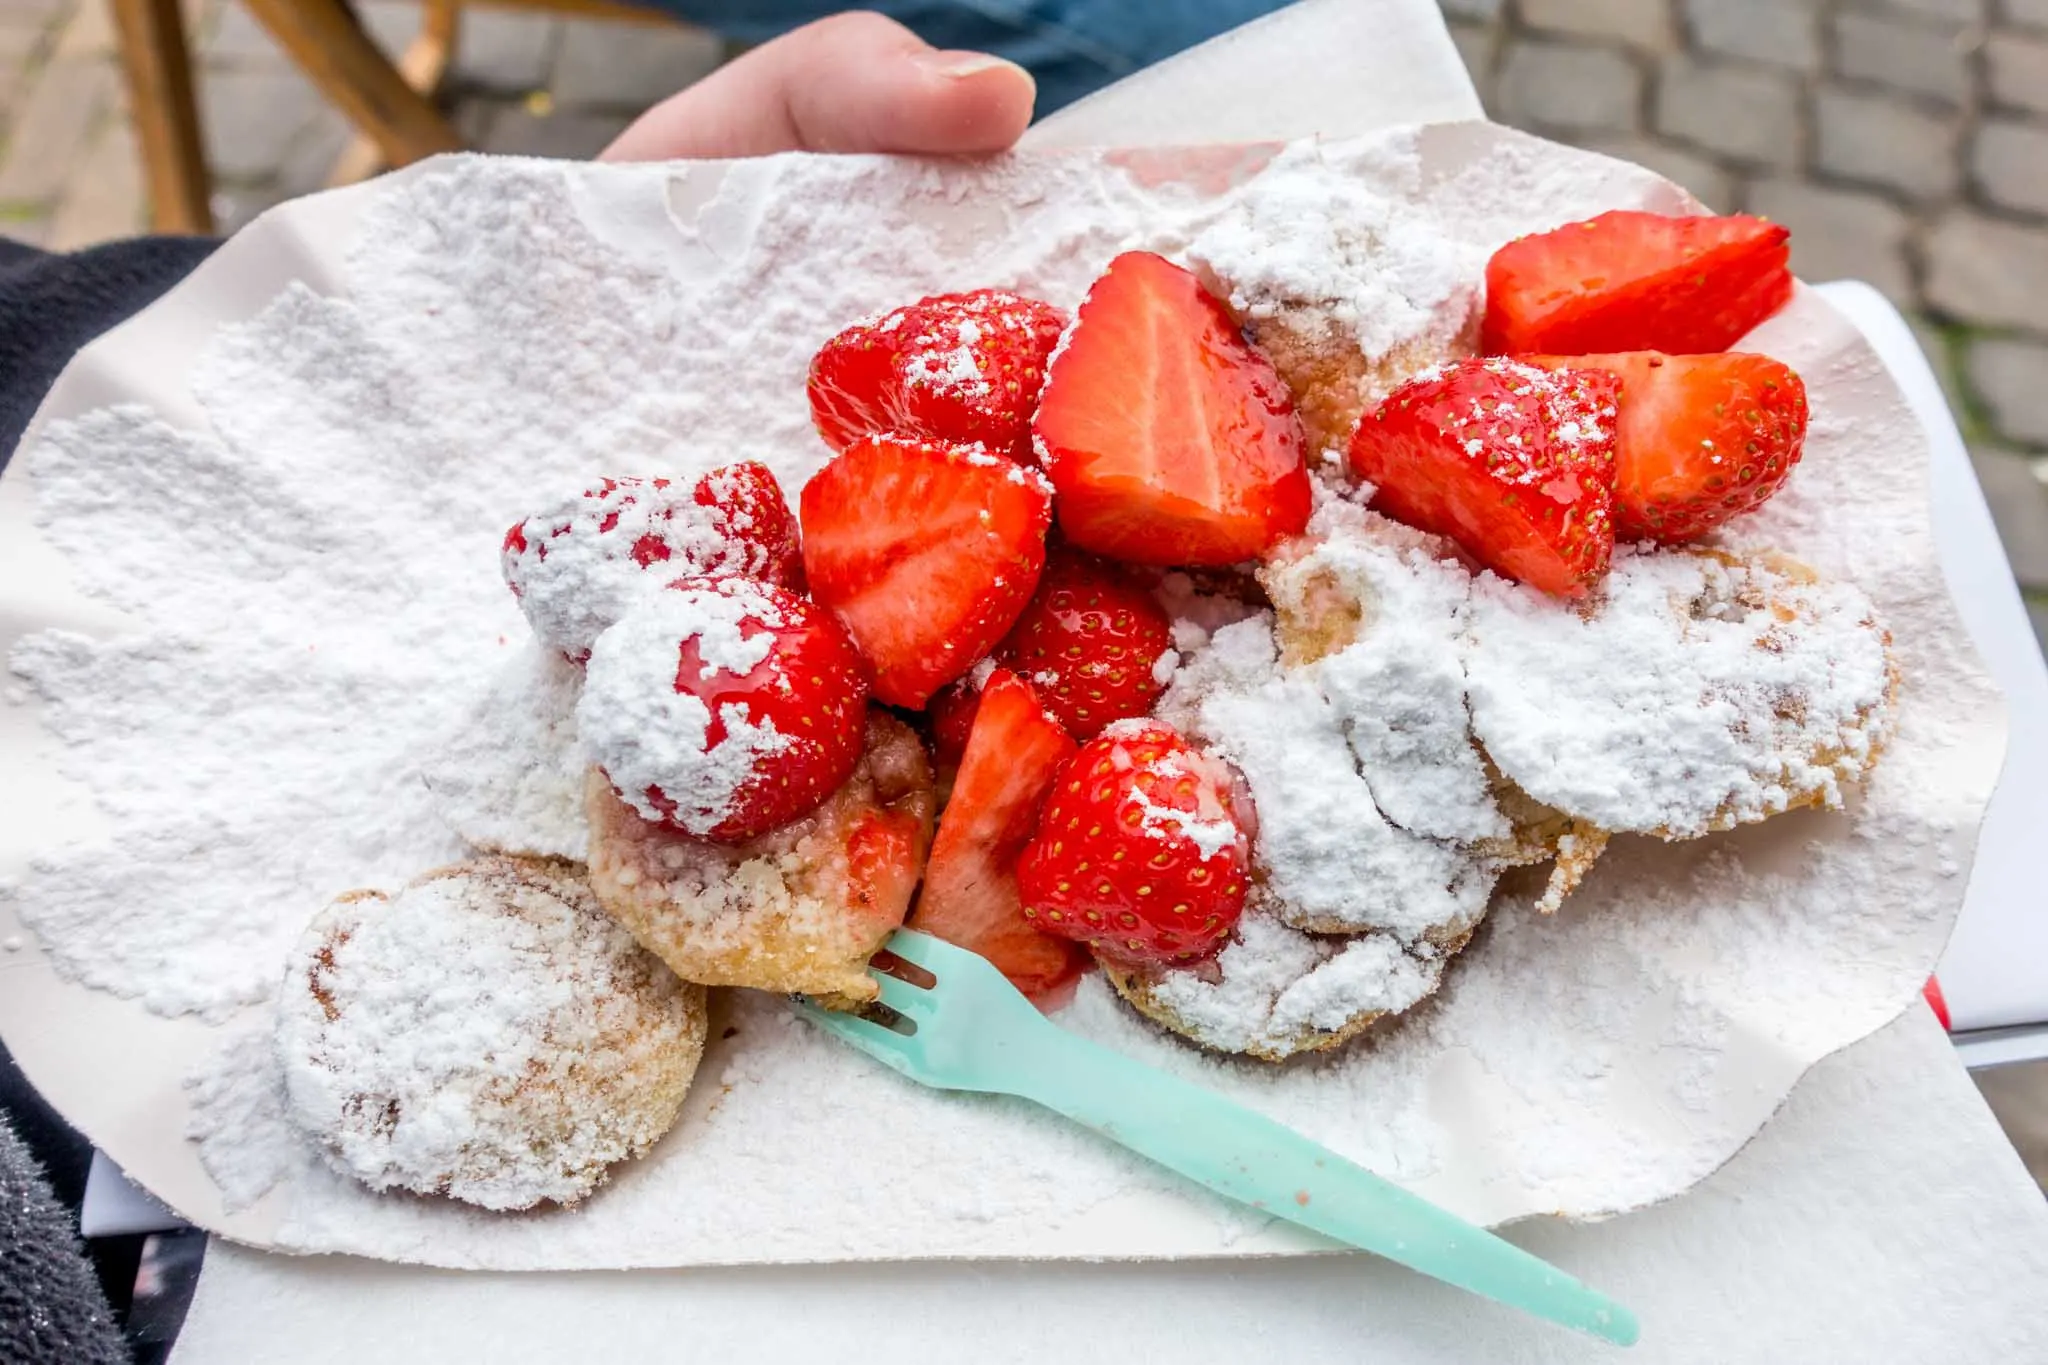 Small pancakes topped with powdered sugar and strawberries